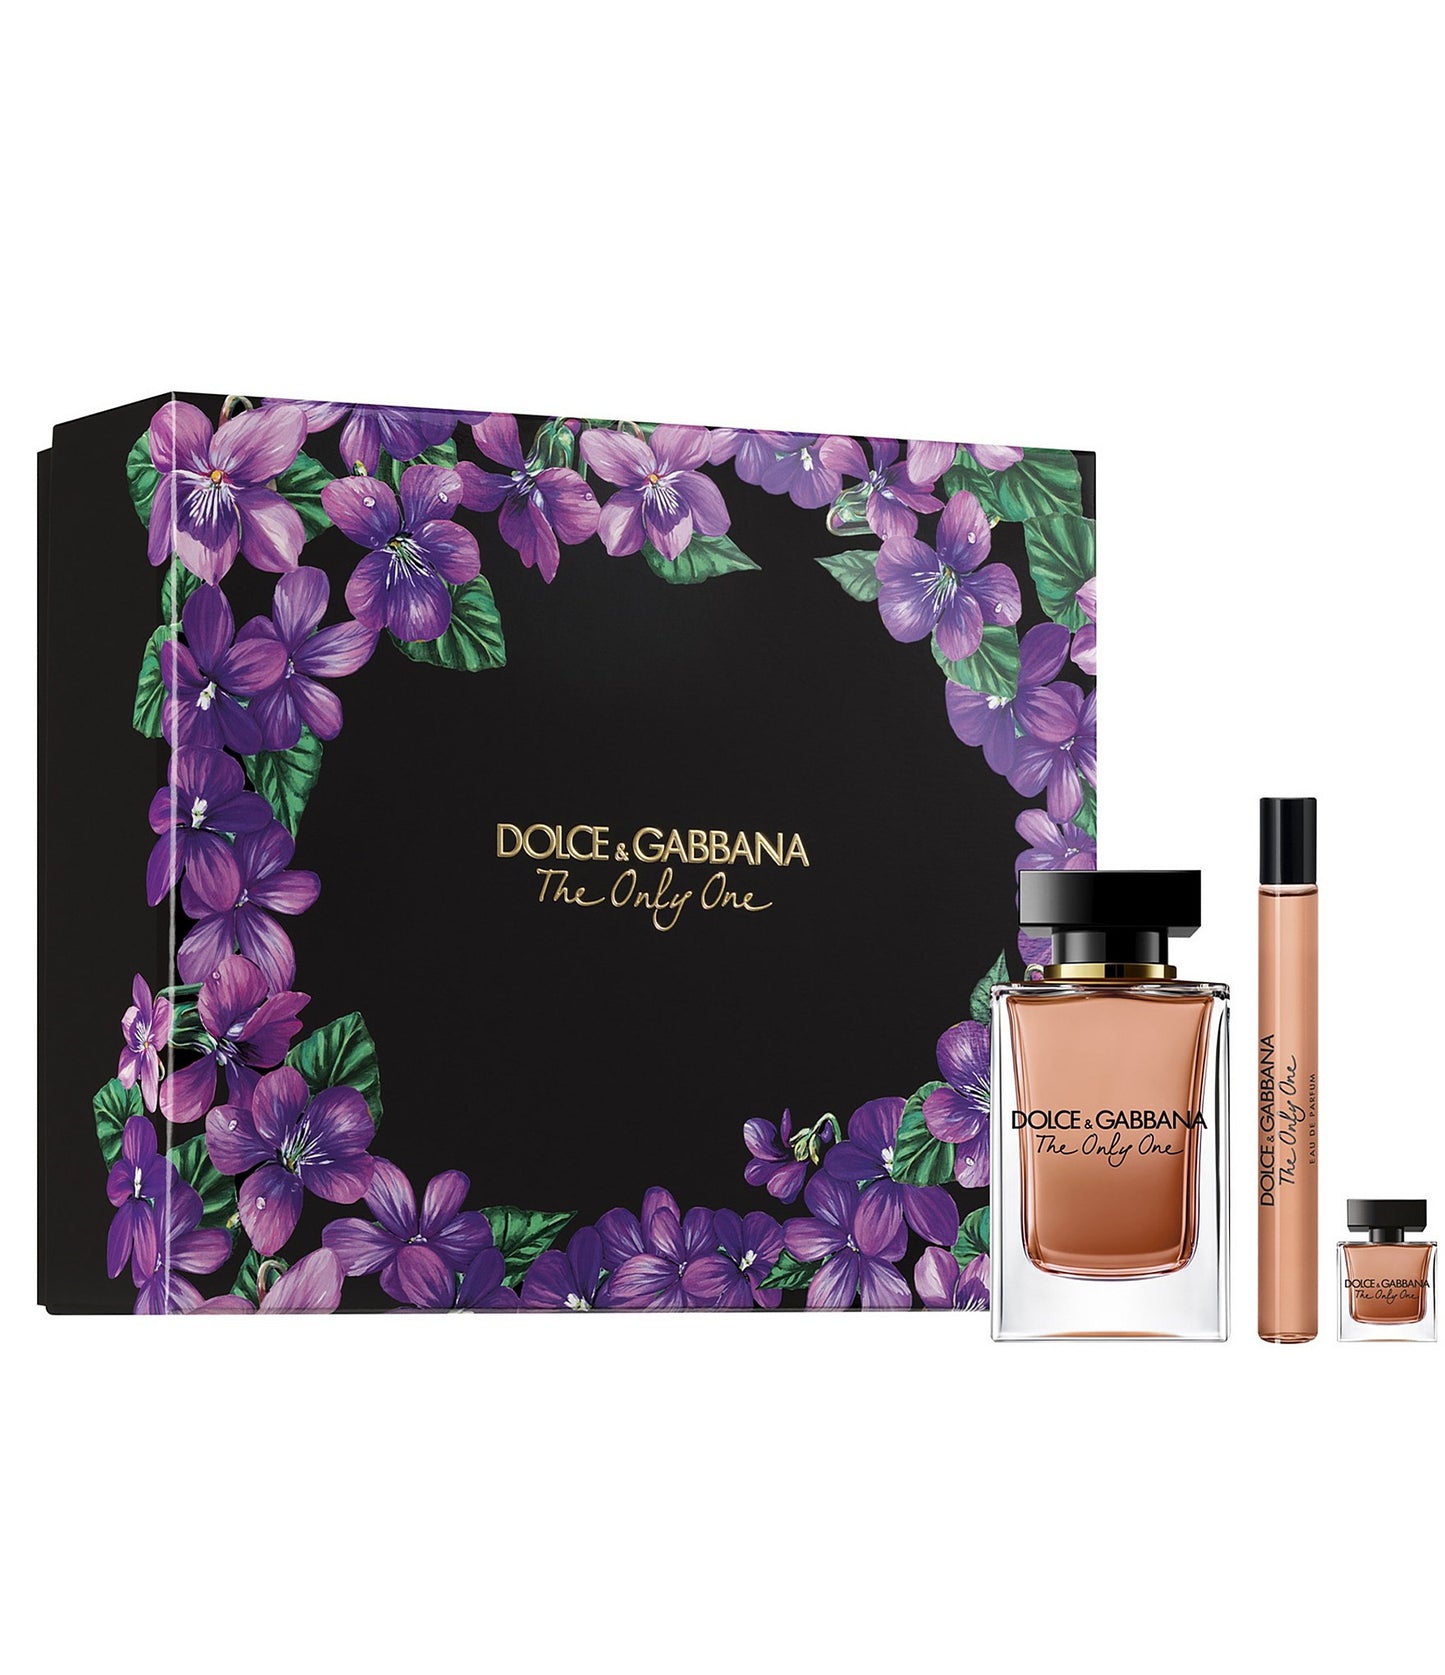 The Only One 3 pc. Set for Women by Dolce & Gabbana